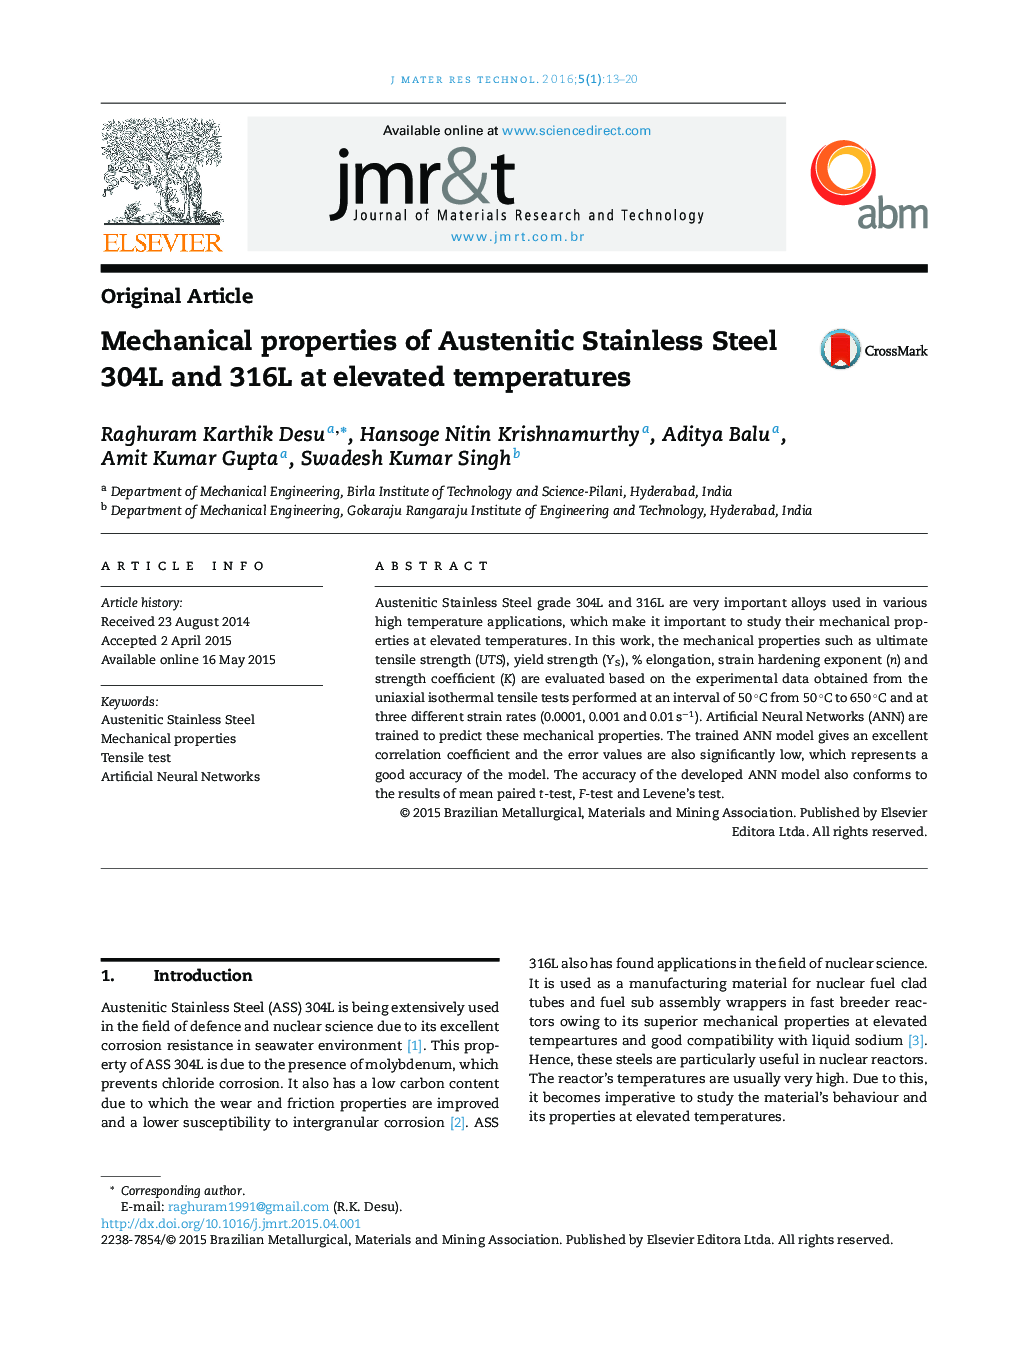 Mechanical properties of Austenitic Stainless Steel 304L and 316L at elevated temperatures